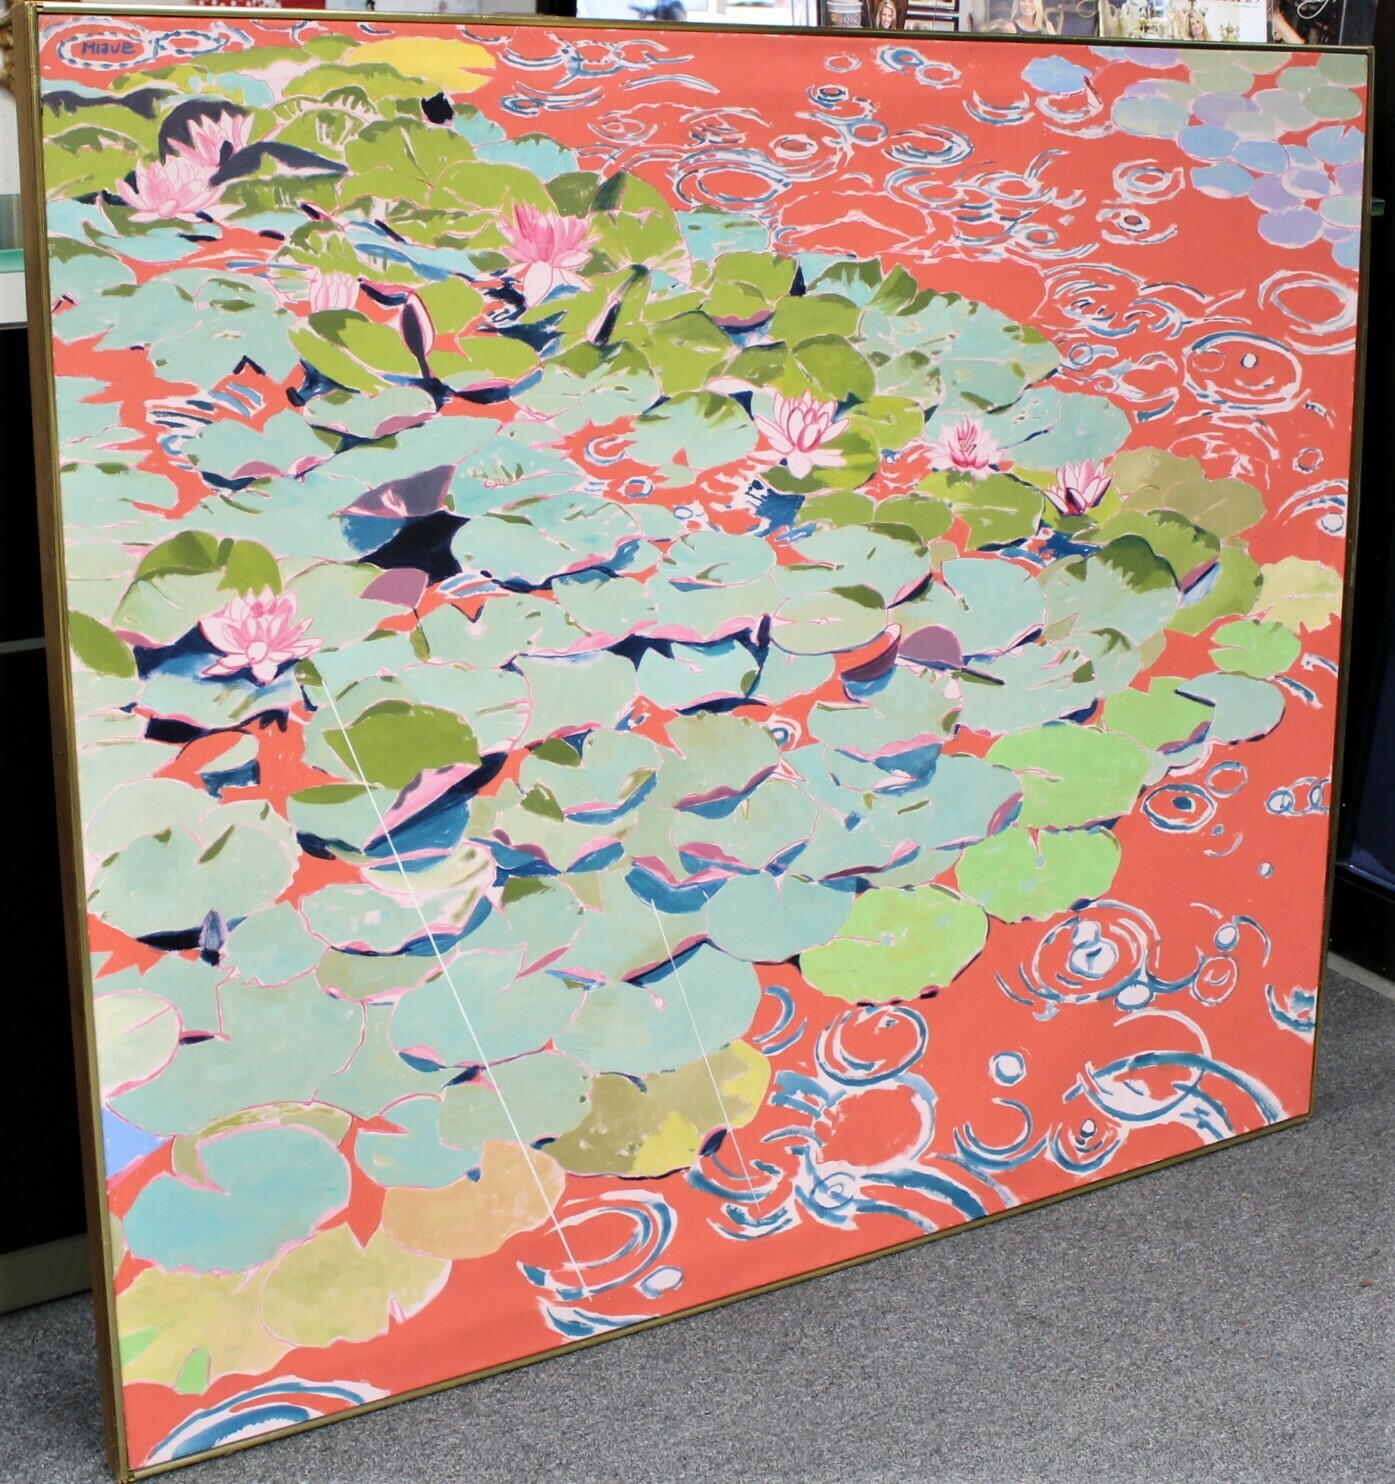 Huge 20th Century Water Lily Pad Oil on Canvas Painting, Signed by Artist Miave